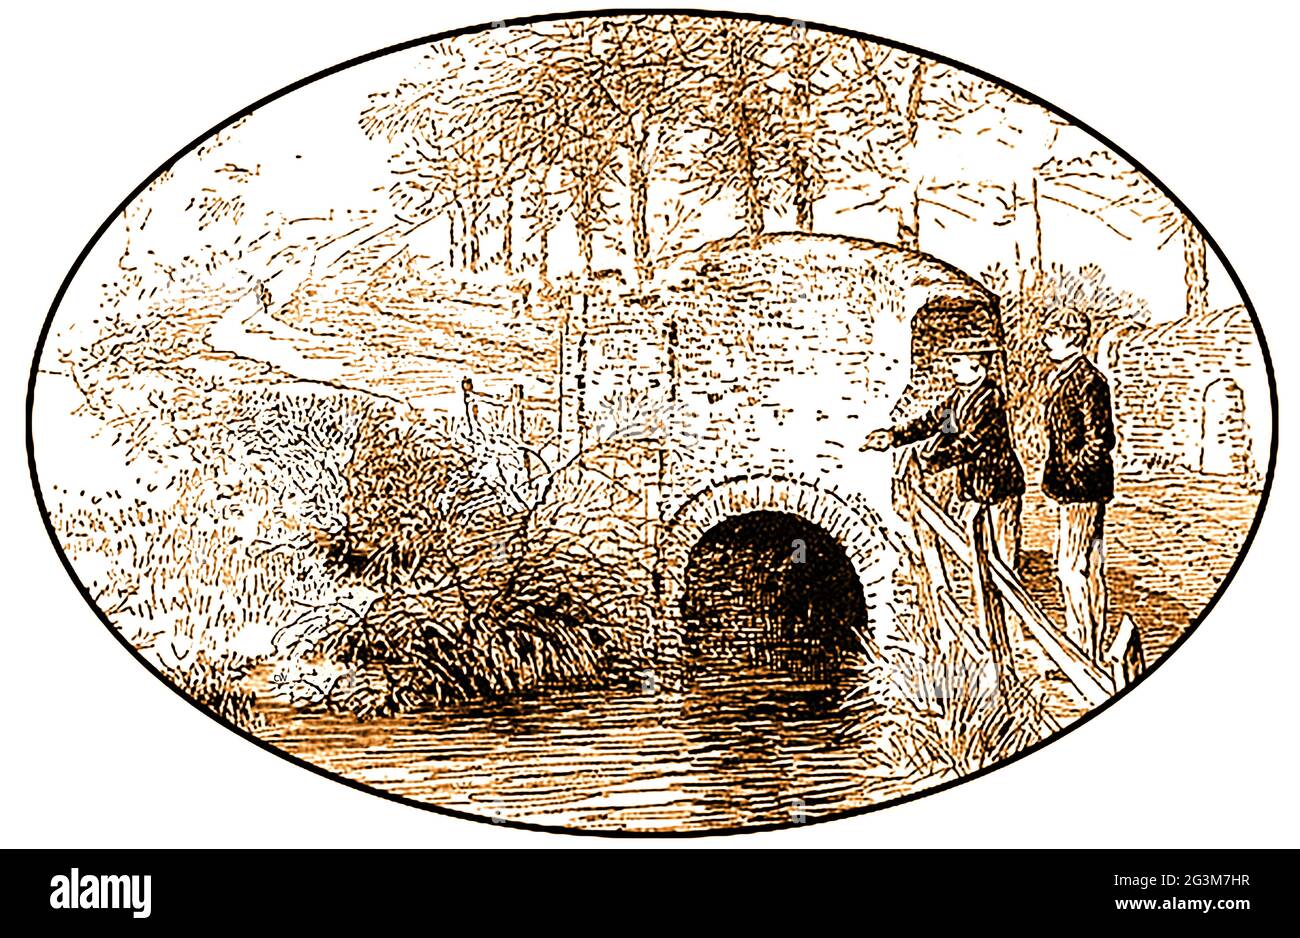 Engraving showing Butler's Leap Bridge, near Rugby, U.K.  in 1891. The bridge over Clifton Brook on Clifton Road, Rugby derives its name from a boy named Butler from Rugby School who famously  jumped  over the brook  from the road to the other side in 1849.A Second World War square concrete pillbox. It is located on the Oxford Canal near Butlers Leap. Stock Photo